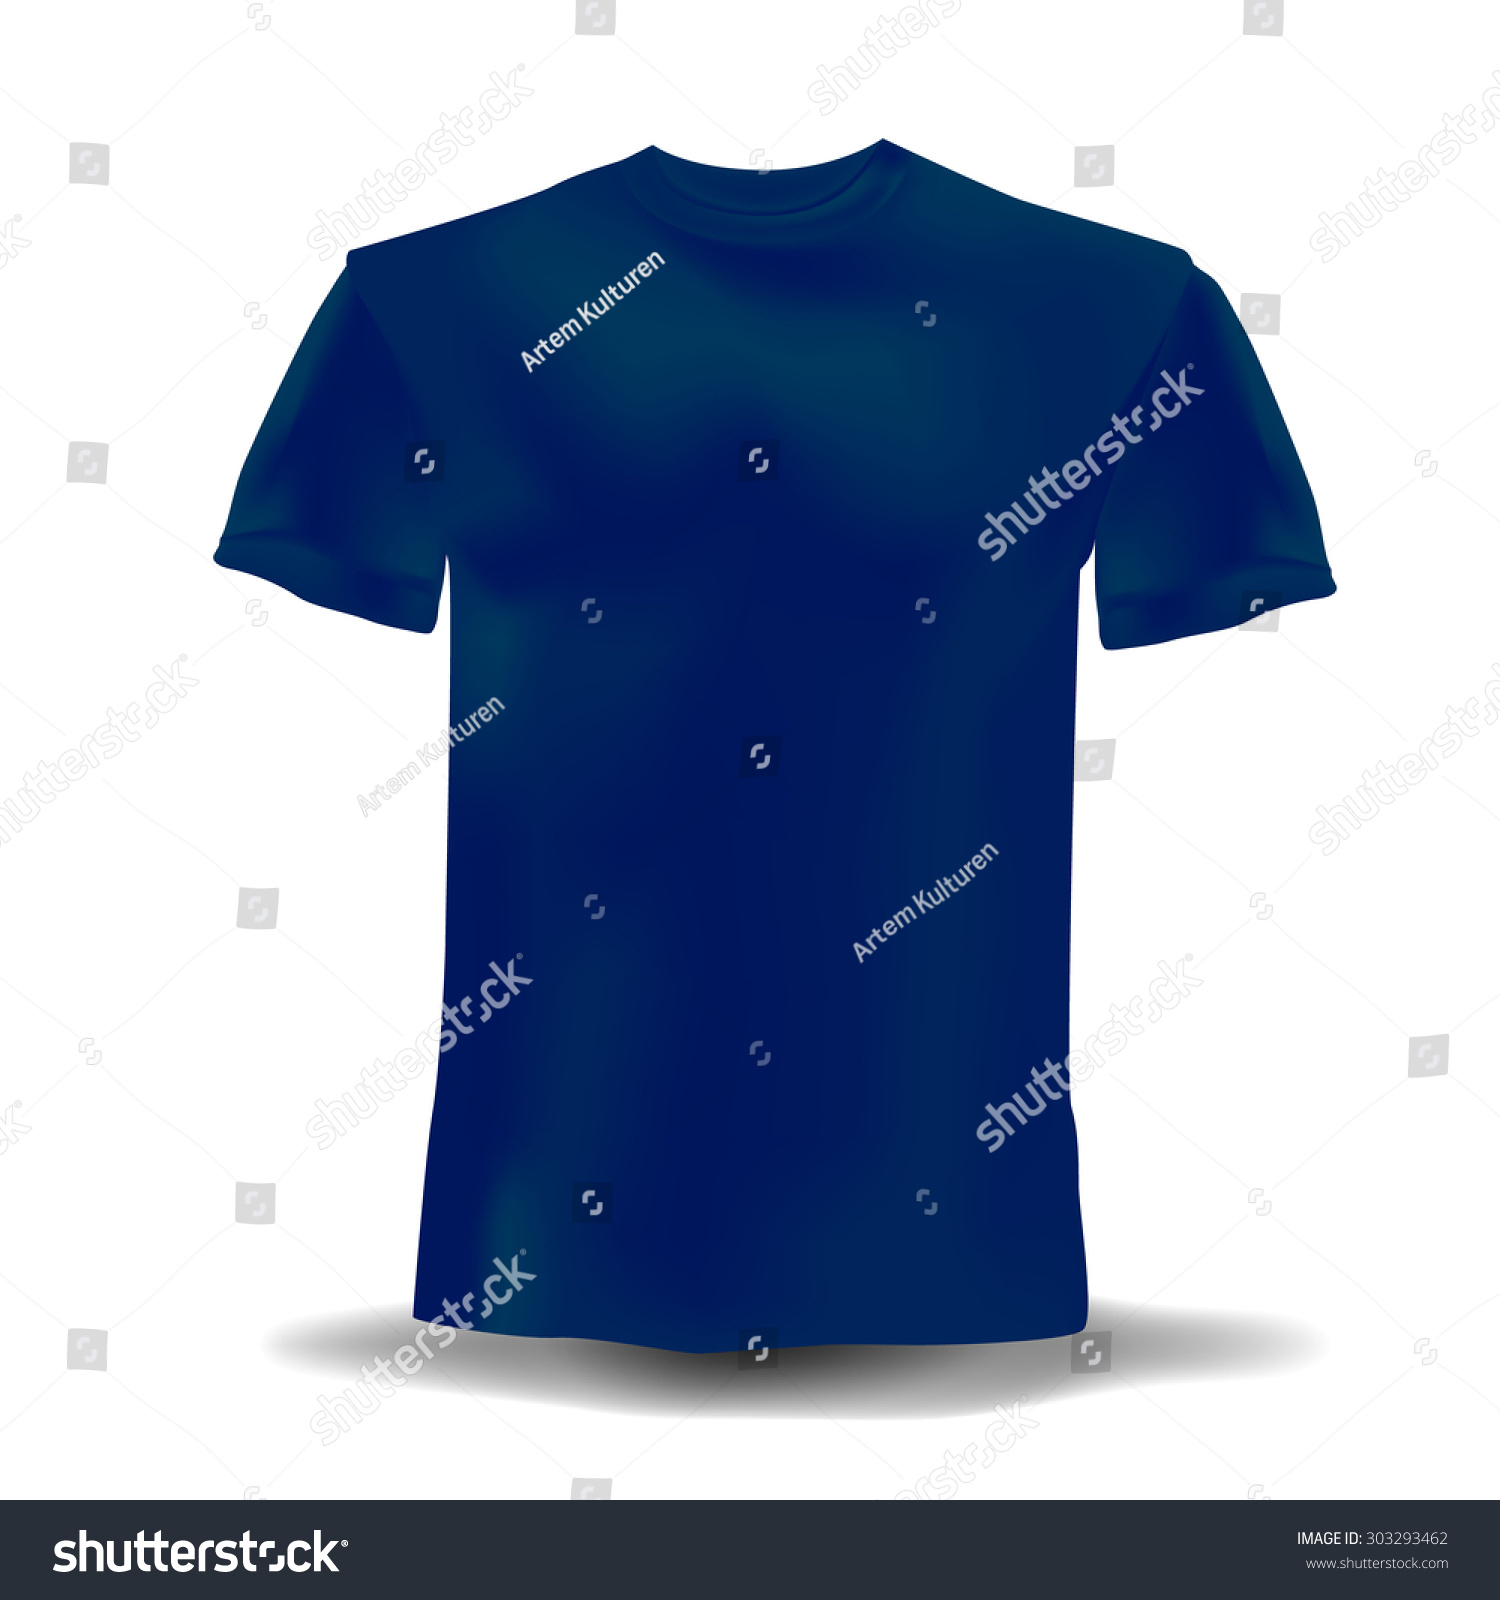 Isolated Realistic Navy Blue Template Tshirts Stock Vector 303293462 ...